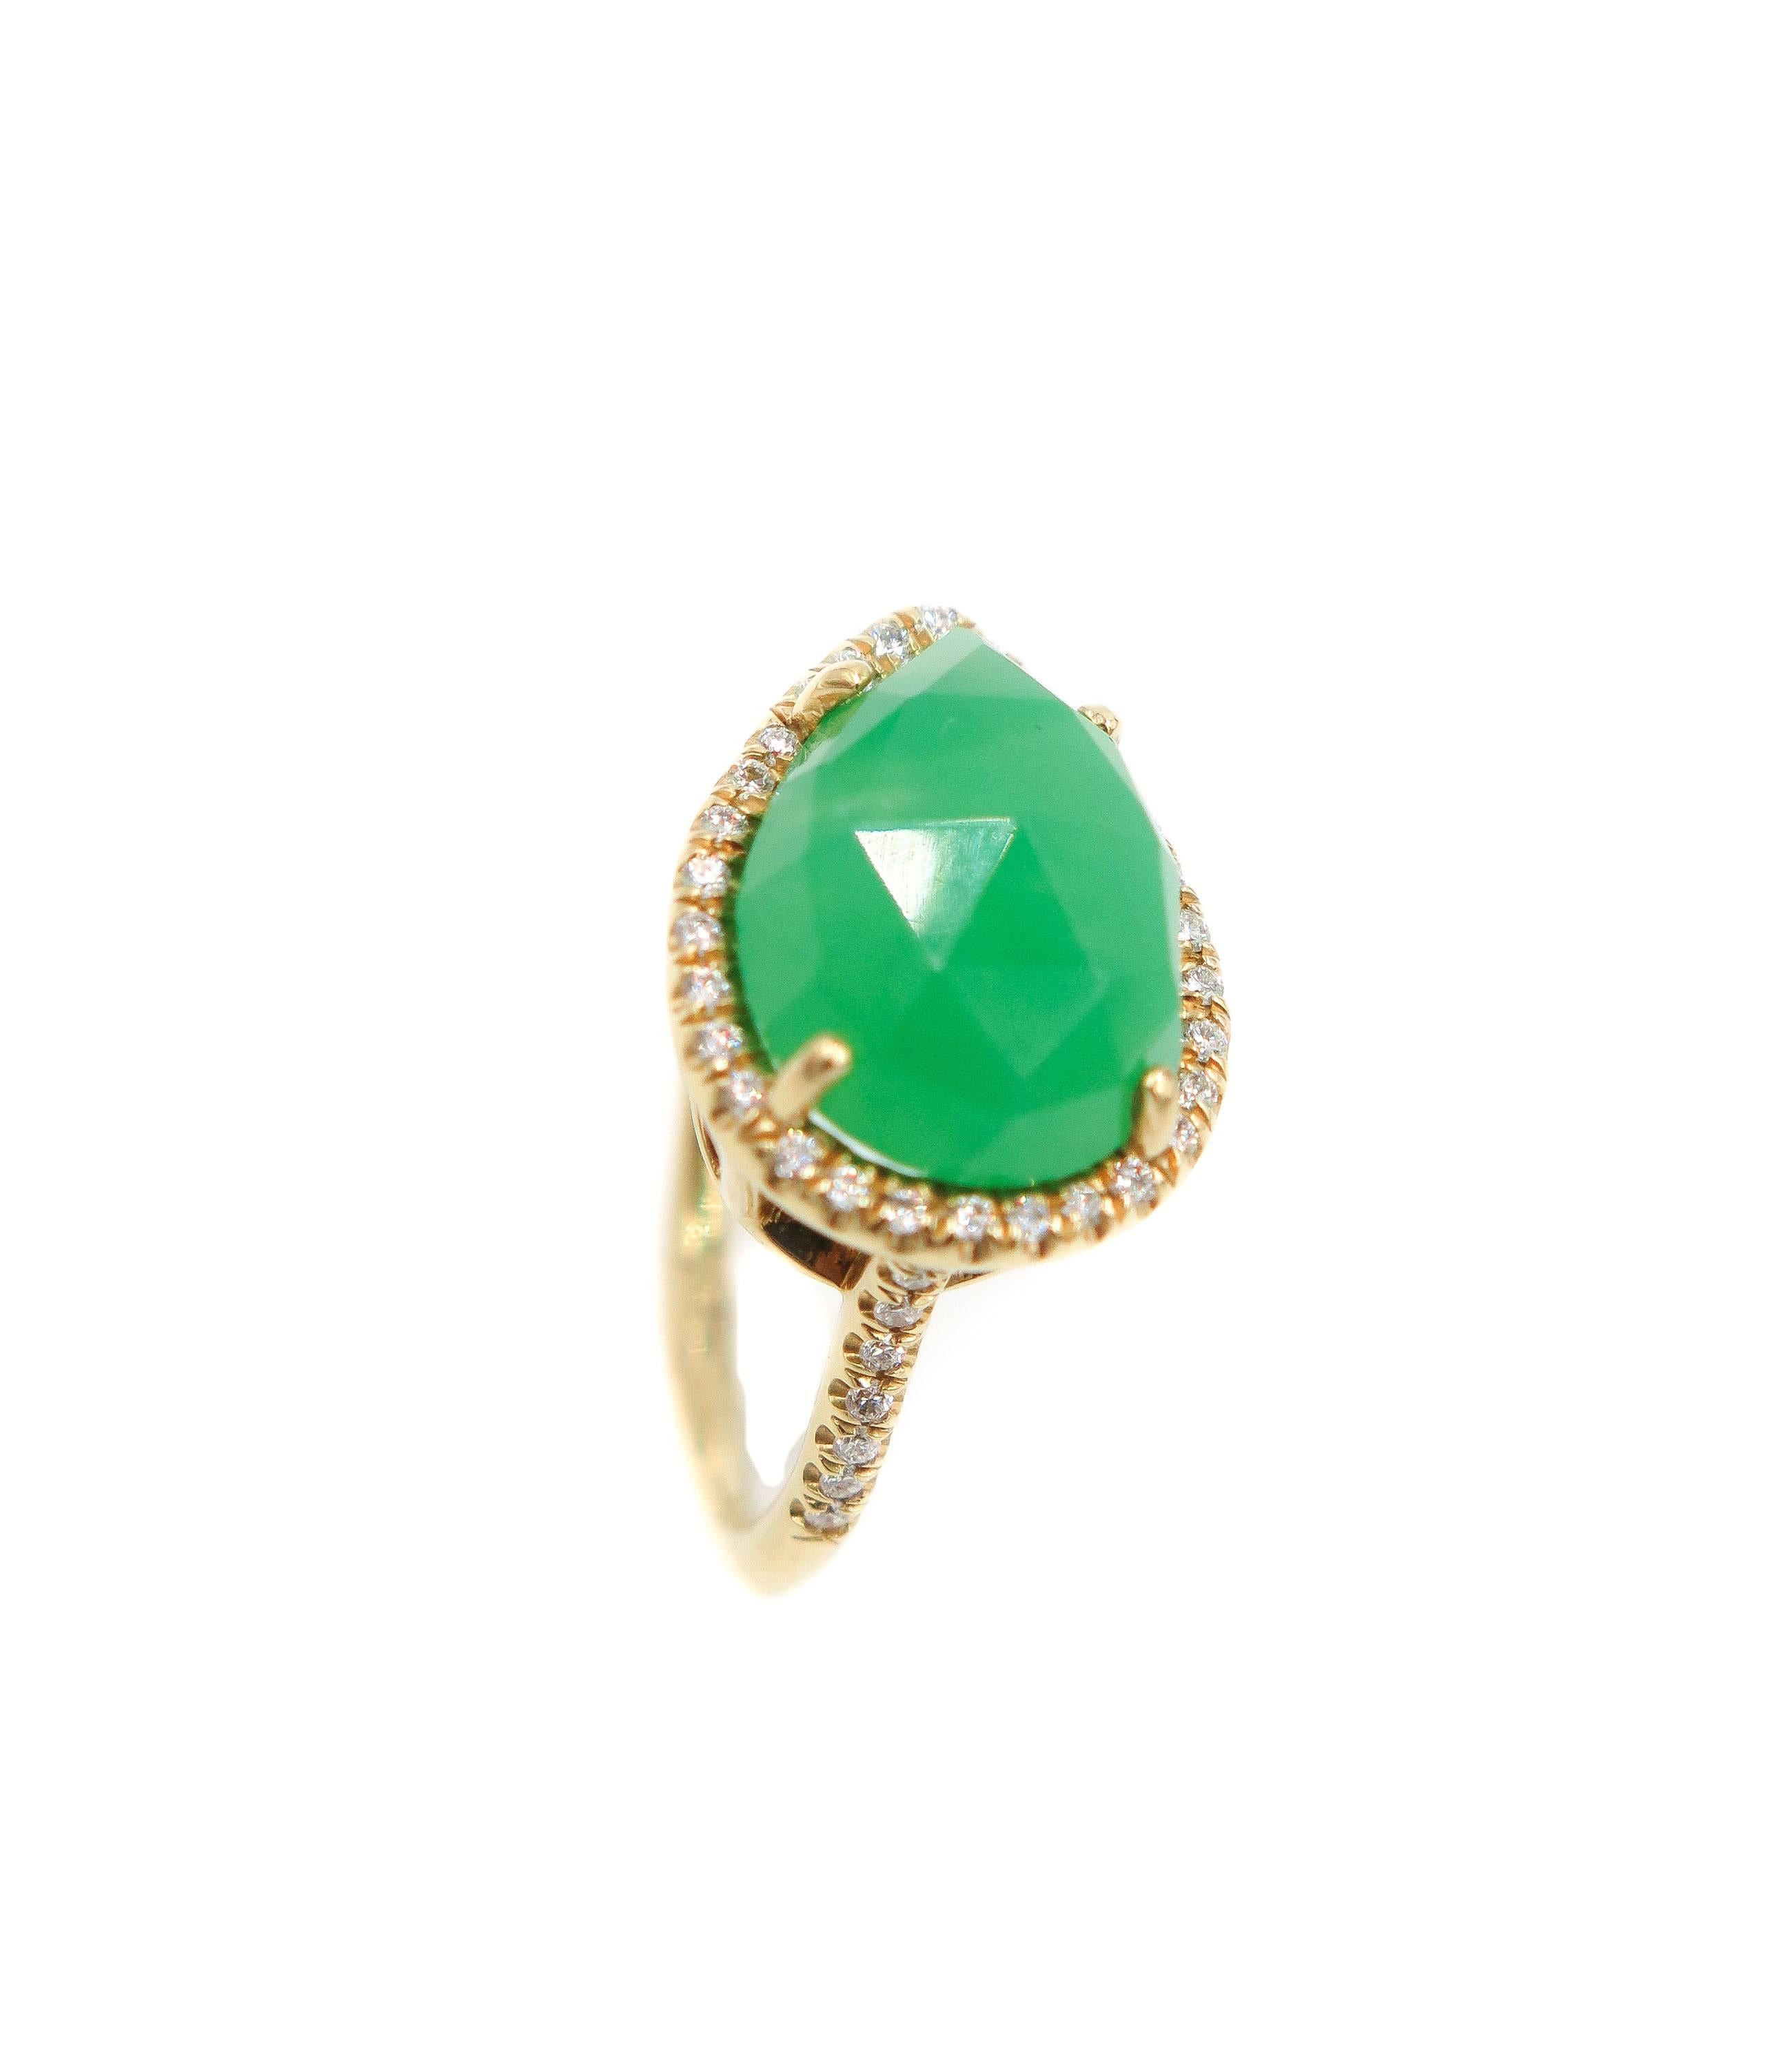 A ring that is feminine, but with a bit of an edge, innovative, yet on trend with the latest fashions. 
This “bohemian chic” ring is designed to feature a pear shaped apple green chrysoprase surrounded by white round cut diamonds.
Created in NYC by